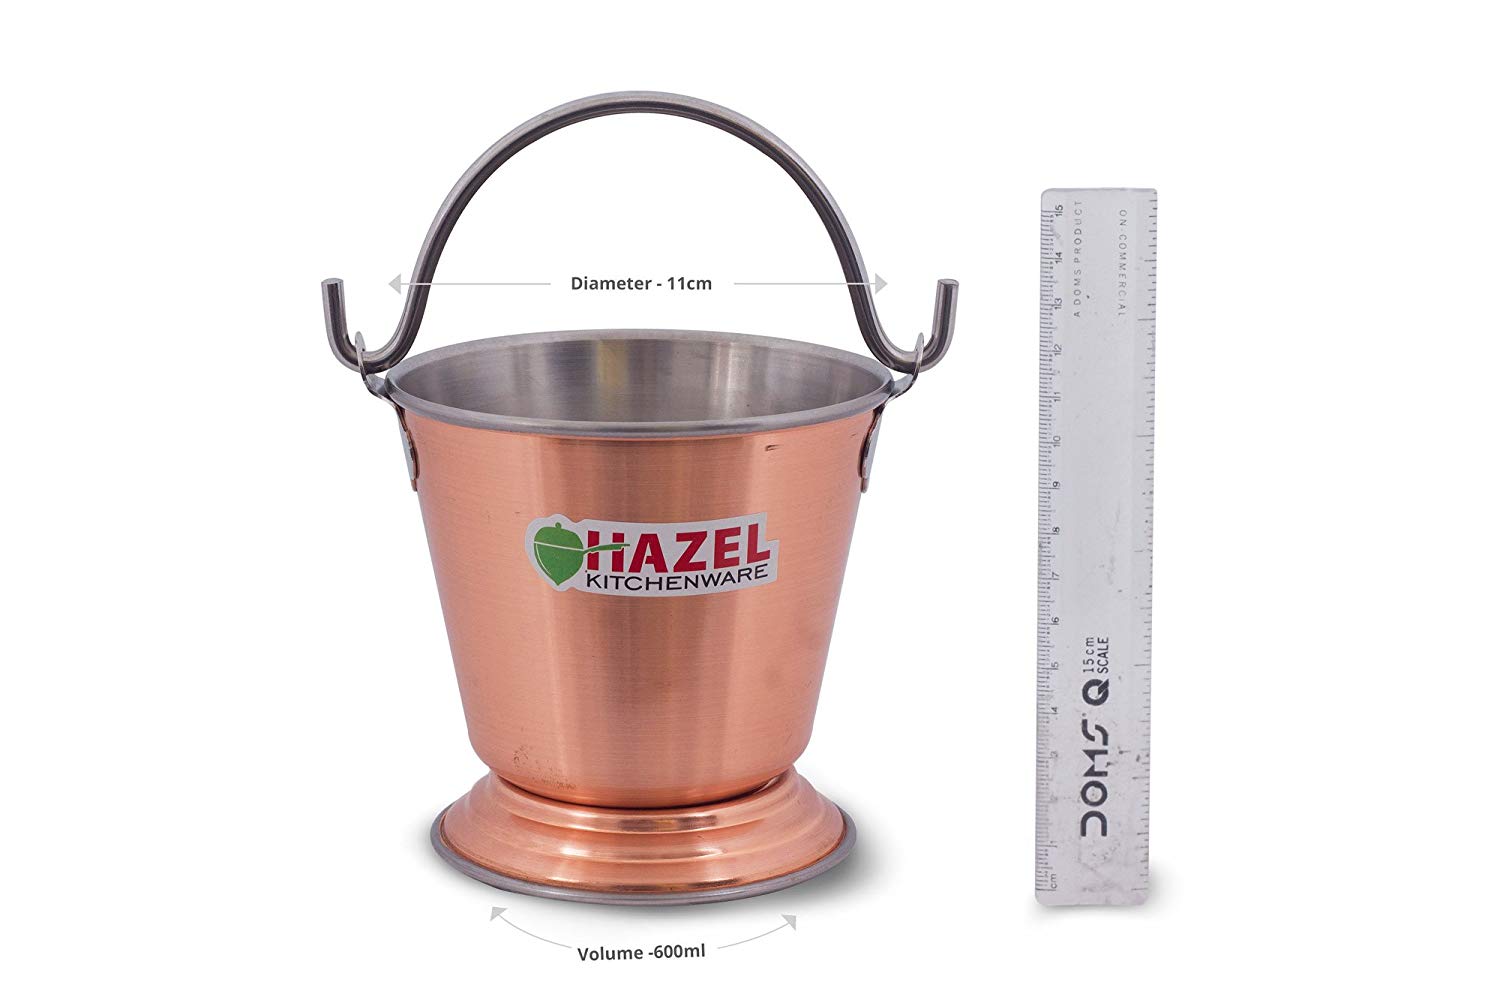 HAZEL Food Curry Dal Serving Stainless Steel Bucket (600 ml), Silver & Copper